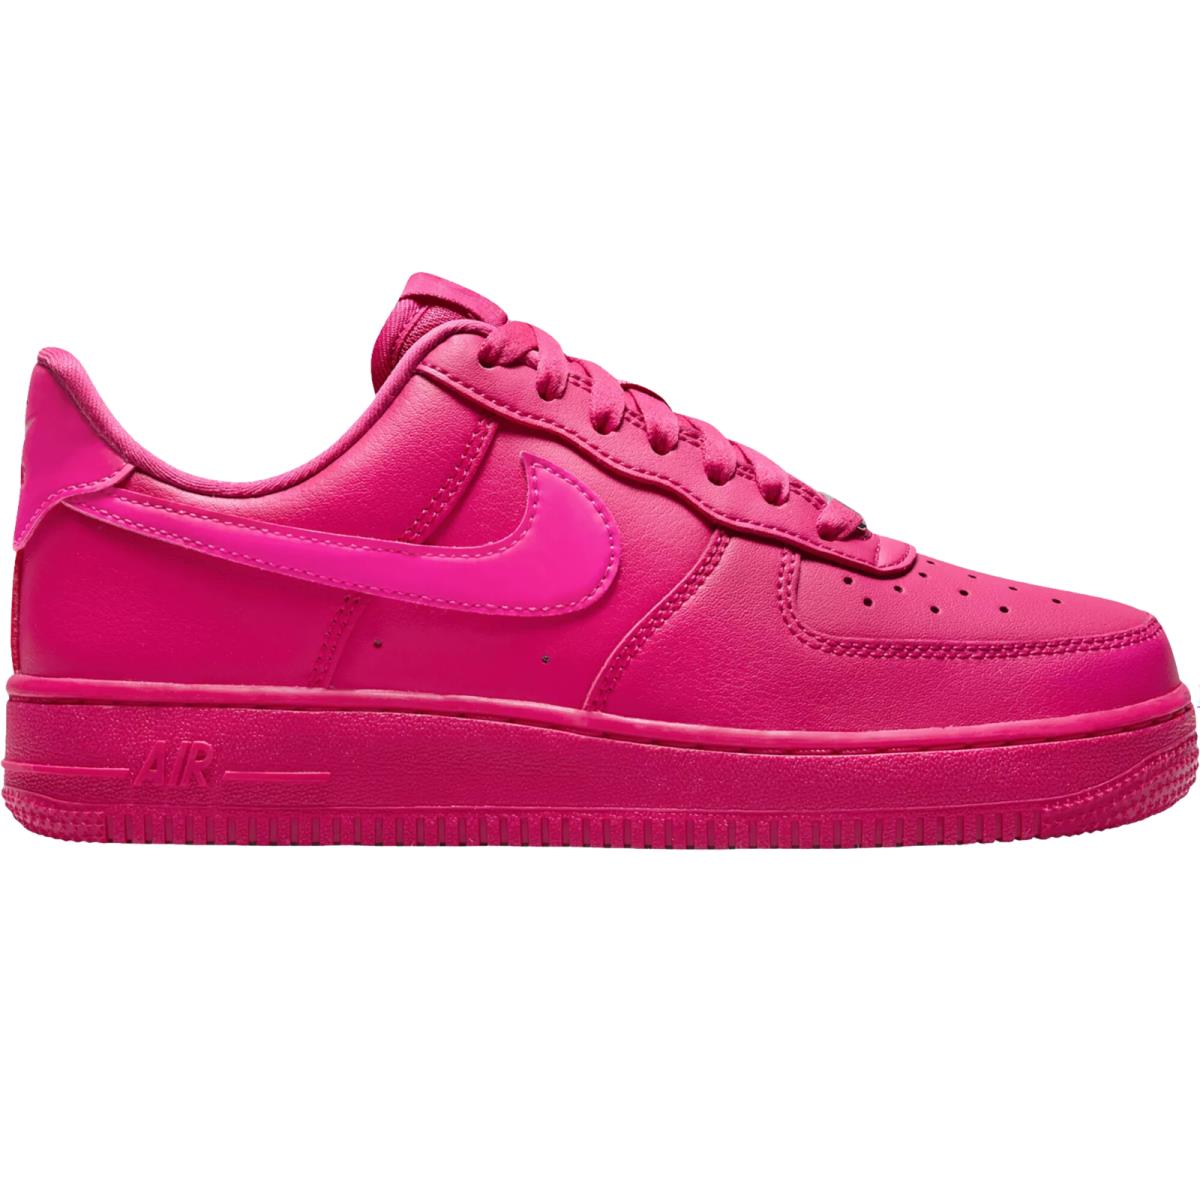 Nike Air Force 1 Women`s Casual Shoes All Colors US Sizes 6-11 Fireberry/Fierce Pink/Fireberry